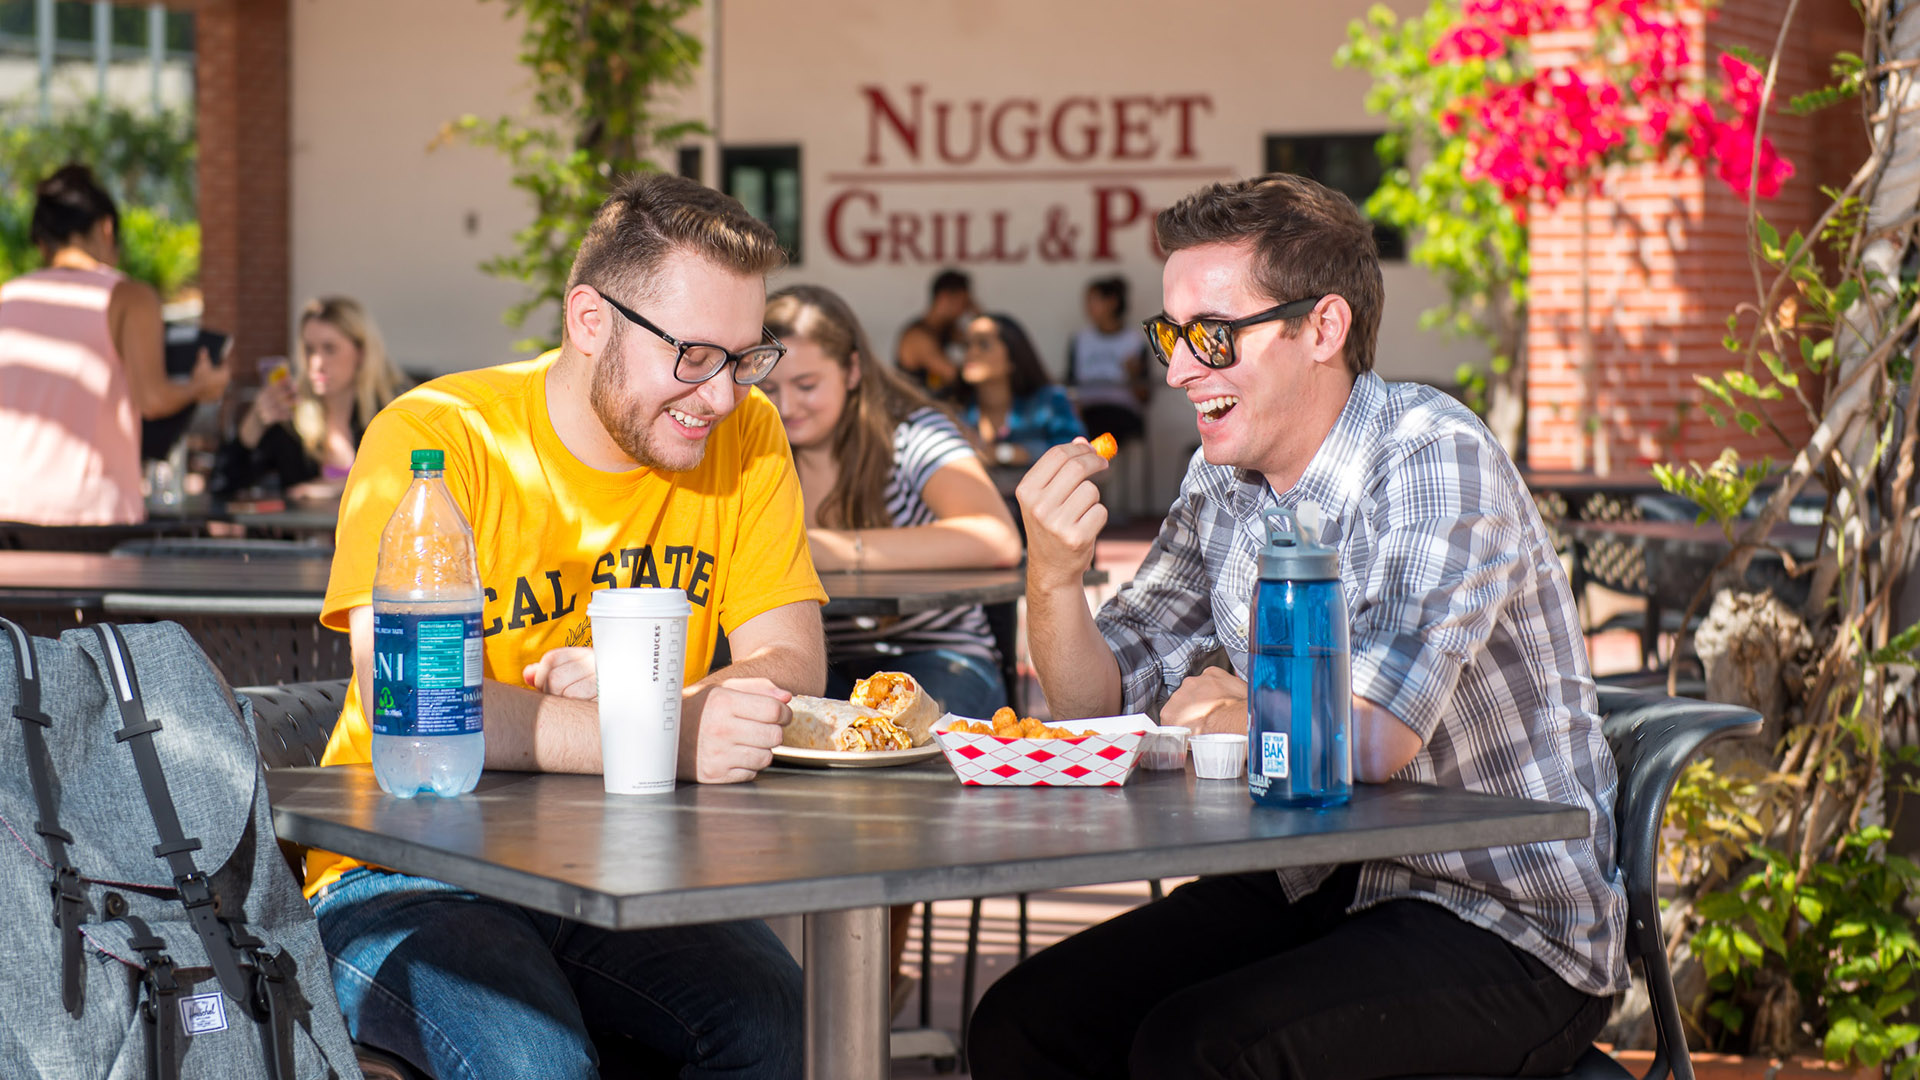 Students, staff and faculty eat on the outdoor patio next to the Nugget Grill & Pub. 